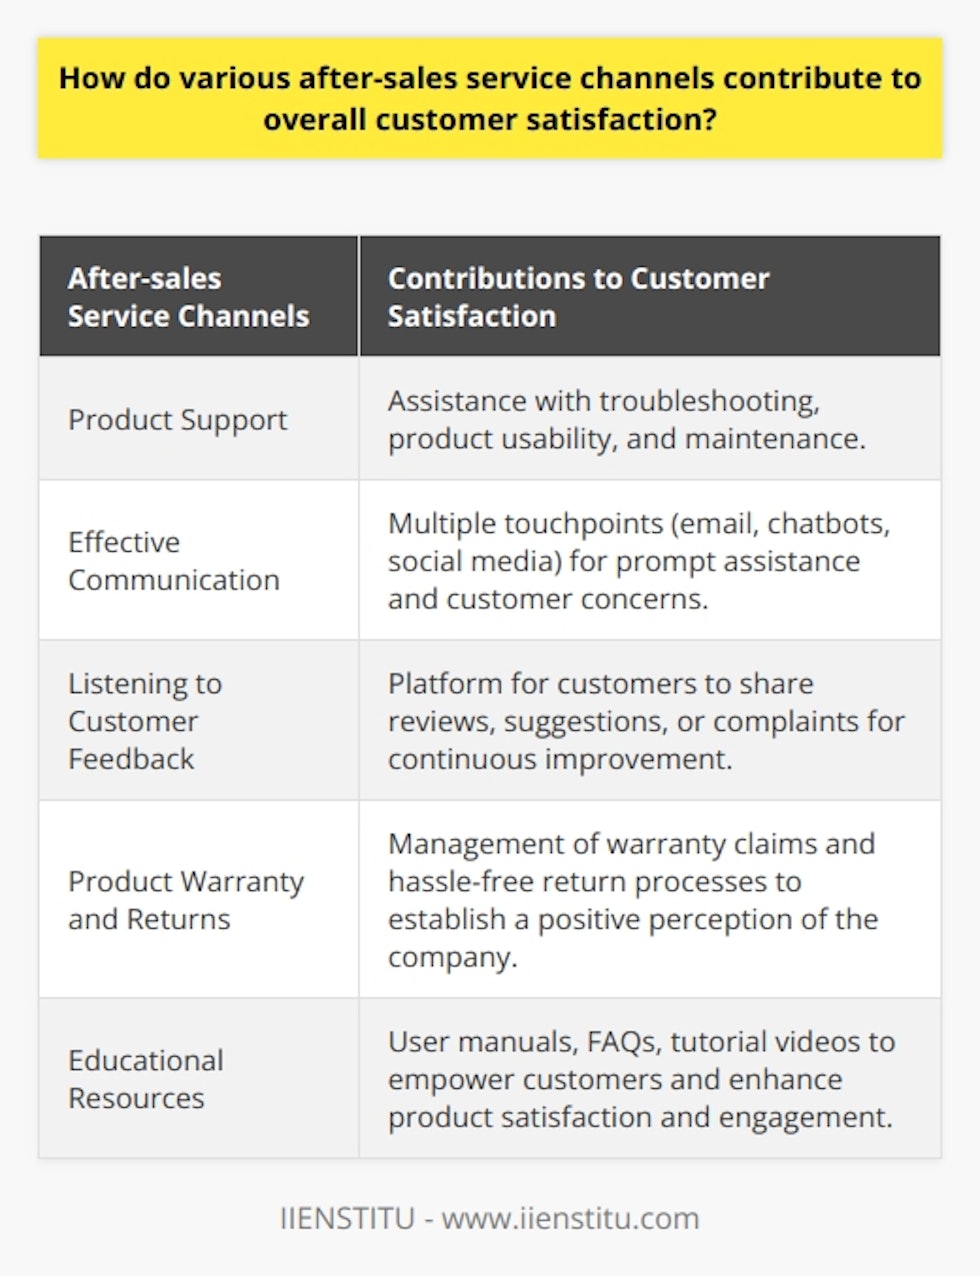 After-sales service channels are essential in enhancing overall customer satisfaction. The provision of product support through these channels ensures that customers can receive assistance with troubleshooting, product usability, and maintenance, thereby maximizing their purchase experience.Effective communication plays a vital role in building trust and loyalty. After-sales channels offer multiple touchpoints, such as email, chatbots, and social media, enabling customers to voice their concerns and receive prompt assistance. The availability of multilingual support further enhances accessibility and provides a personalized experience for a diverse customer base.Listening to customer feedback is crucial for continuous improvement. After-sales channels serve as a platform for customers to share their reviews, suggestions, or complaints, allowing companies to identify areas for improvement and refine their products and services based on customer expectations.The assurance of product warranty and a flexible return policy significantly impact customer satisfaction. After-sales channels manage warranty claims and assist customers in implementing them, ensuring a hassle-free return process. This assurance establishes a positive perception of the company and contributes to overall customer satisfaction.Educational resources provided through after-sales channels, such as user manuals, FAQs, and tutorial videos, empower customers to make the most of their purchase. By educating customers on product features and usage, these resources enhance customer satisfaction and engagement with the available services.In conclusion, after-sales service channels play a vital role in overall customer satisfaction. Through product support, effective communication, customer feedback utilization, assurance of product warranty and returns, and educational resources, companies can elevate the customer experience, leading to increased loyalty and retention.